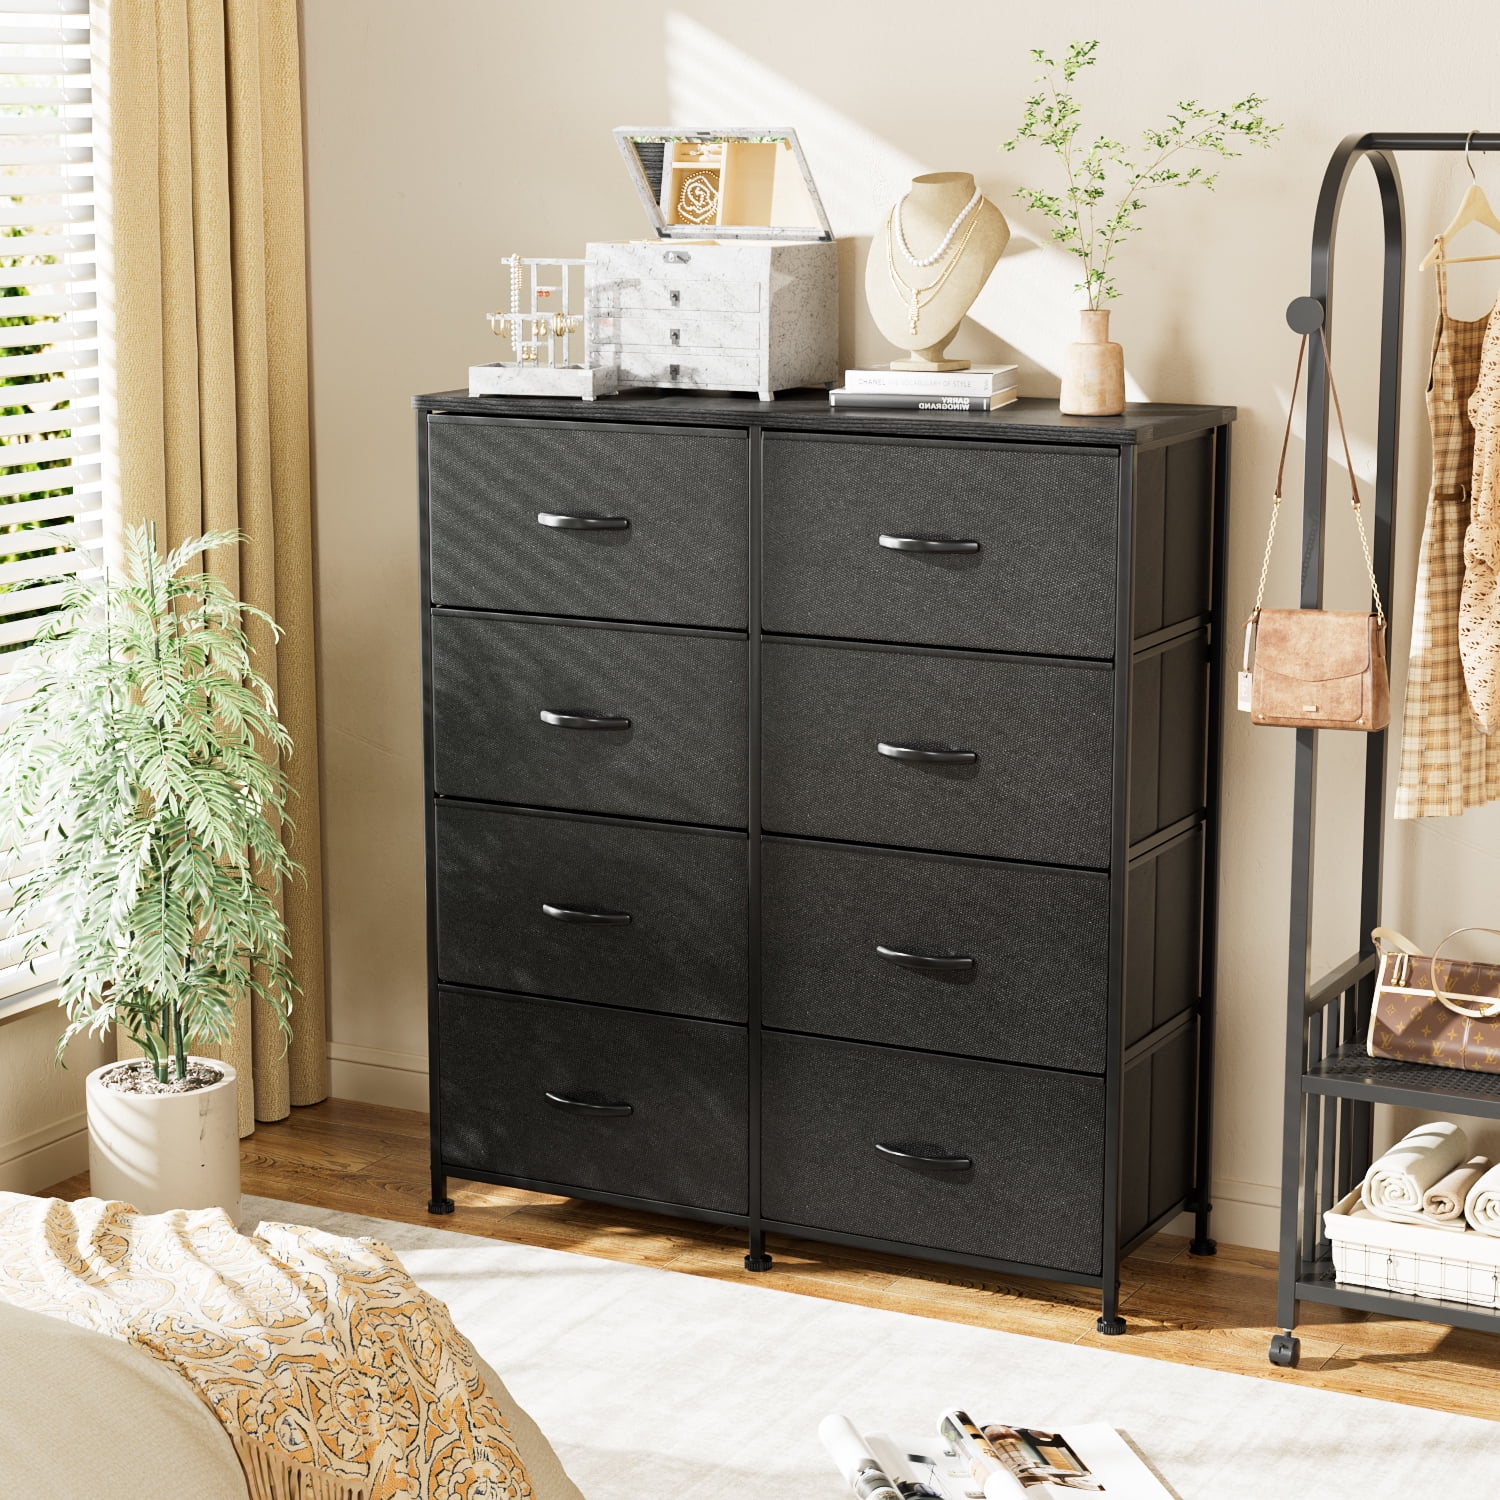 Vineego Dresser for Bedroom with 8 Drawers, Wide Chest of Drawers, Fabric Dresser,Black